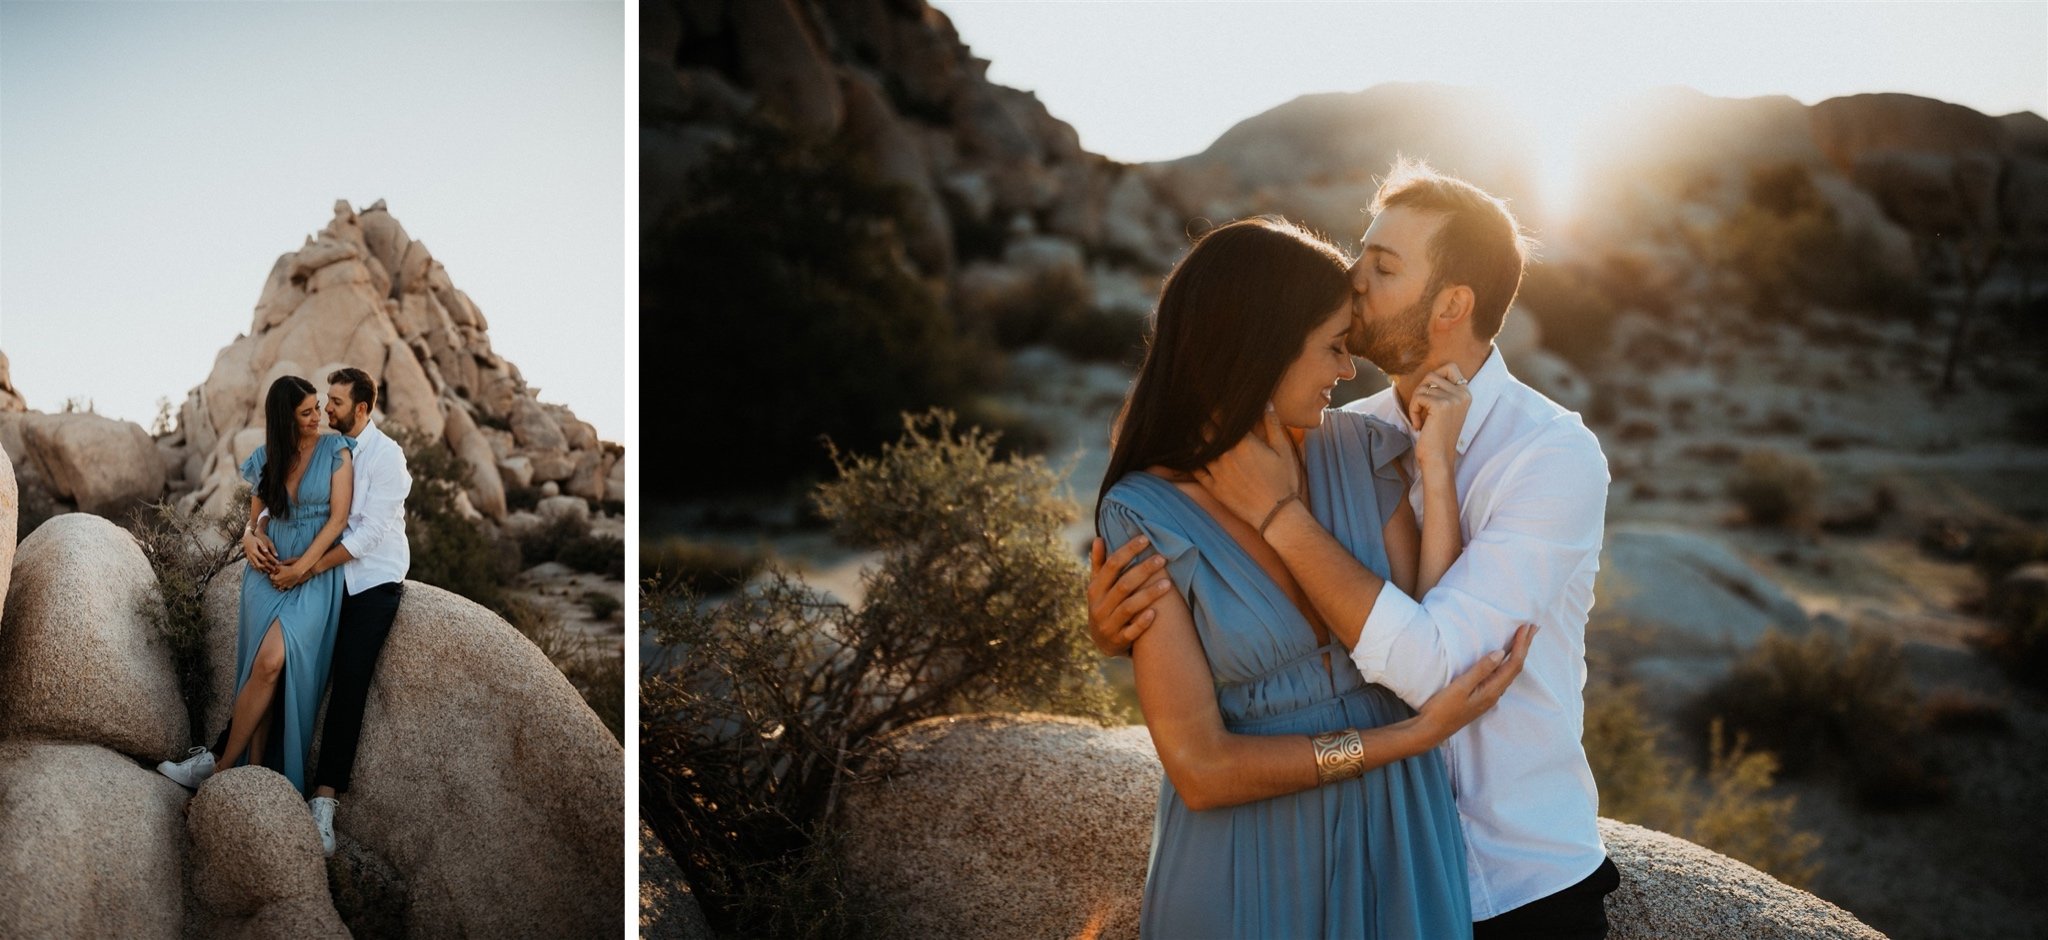 Joshua Tree Couples Session Surprise Proposal - Will Khoury Photography_14.jpg